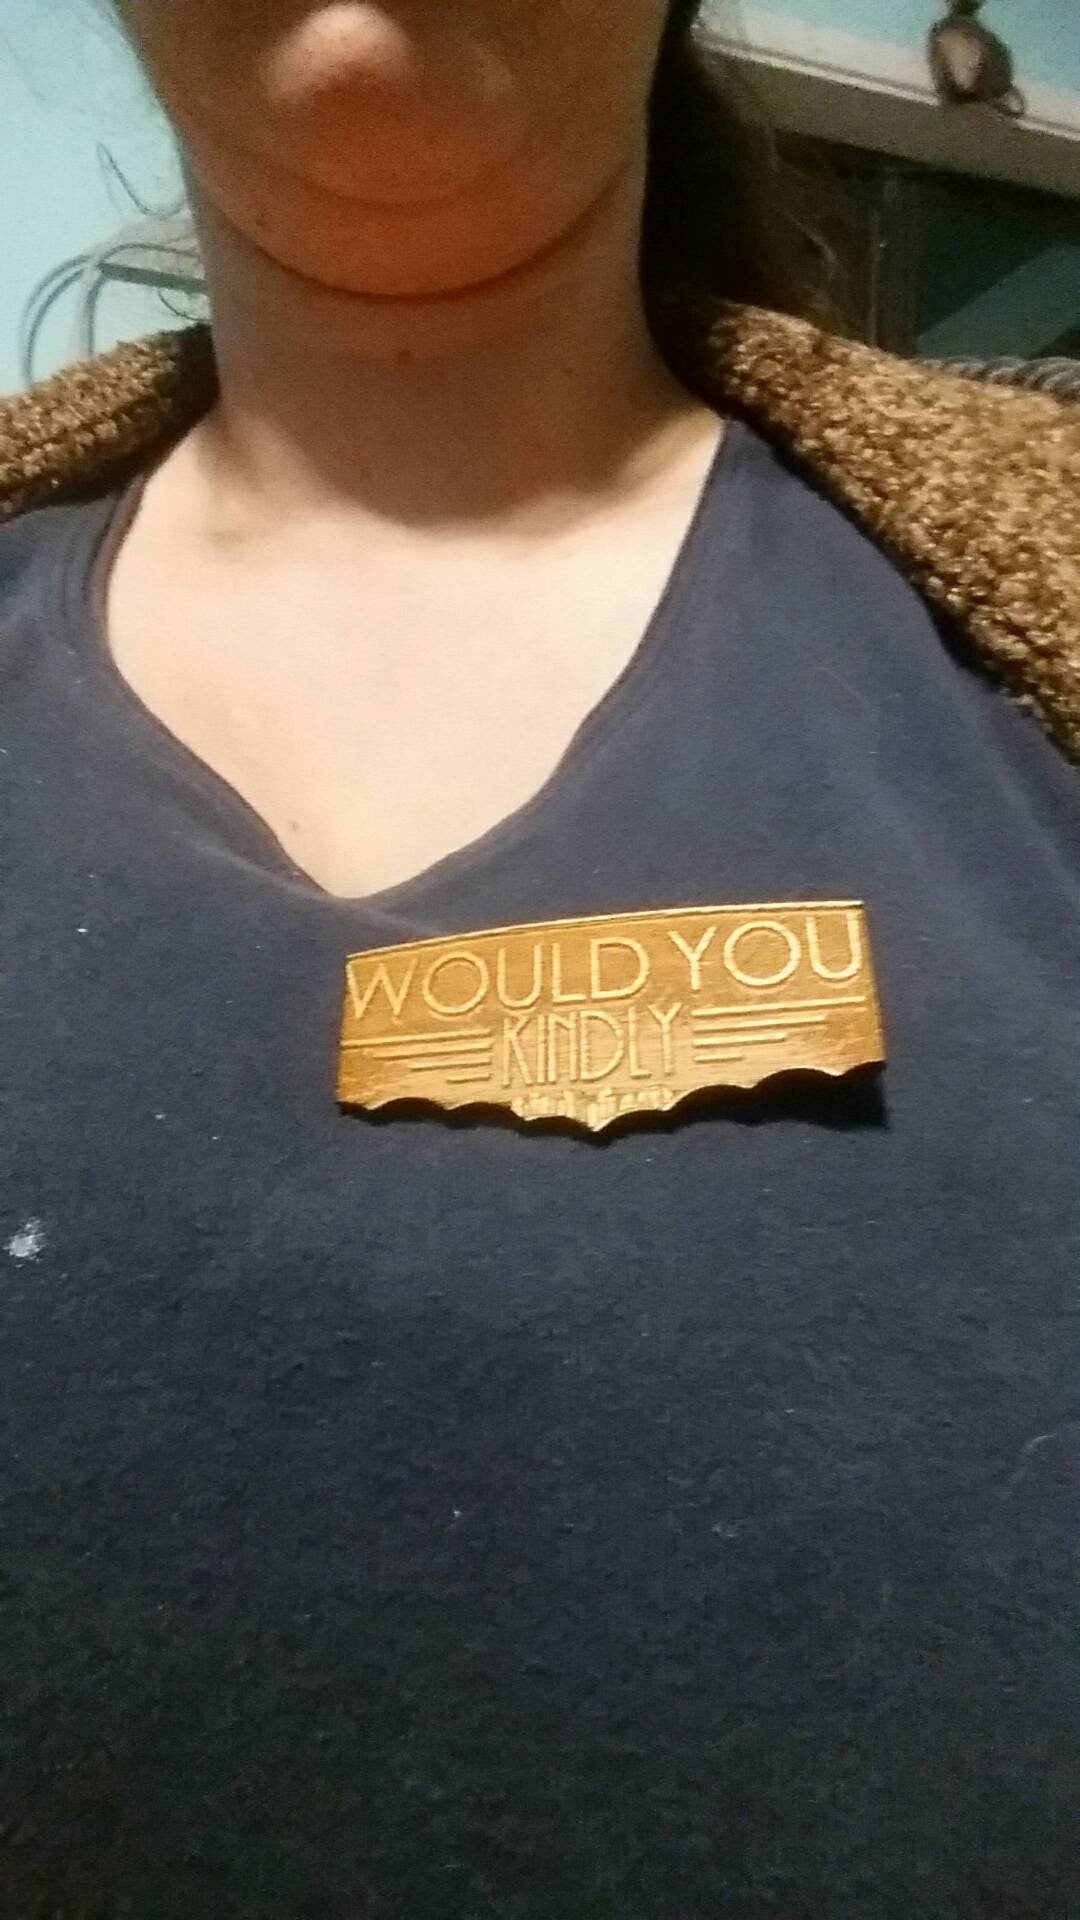 Would You Kindly Bioshock Inspired Gamer Pins Lord and Lady Towers